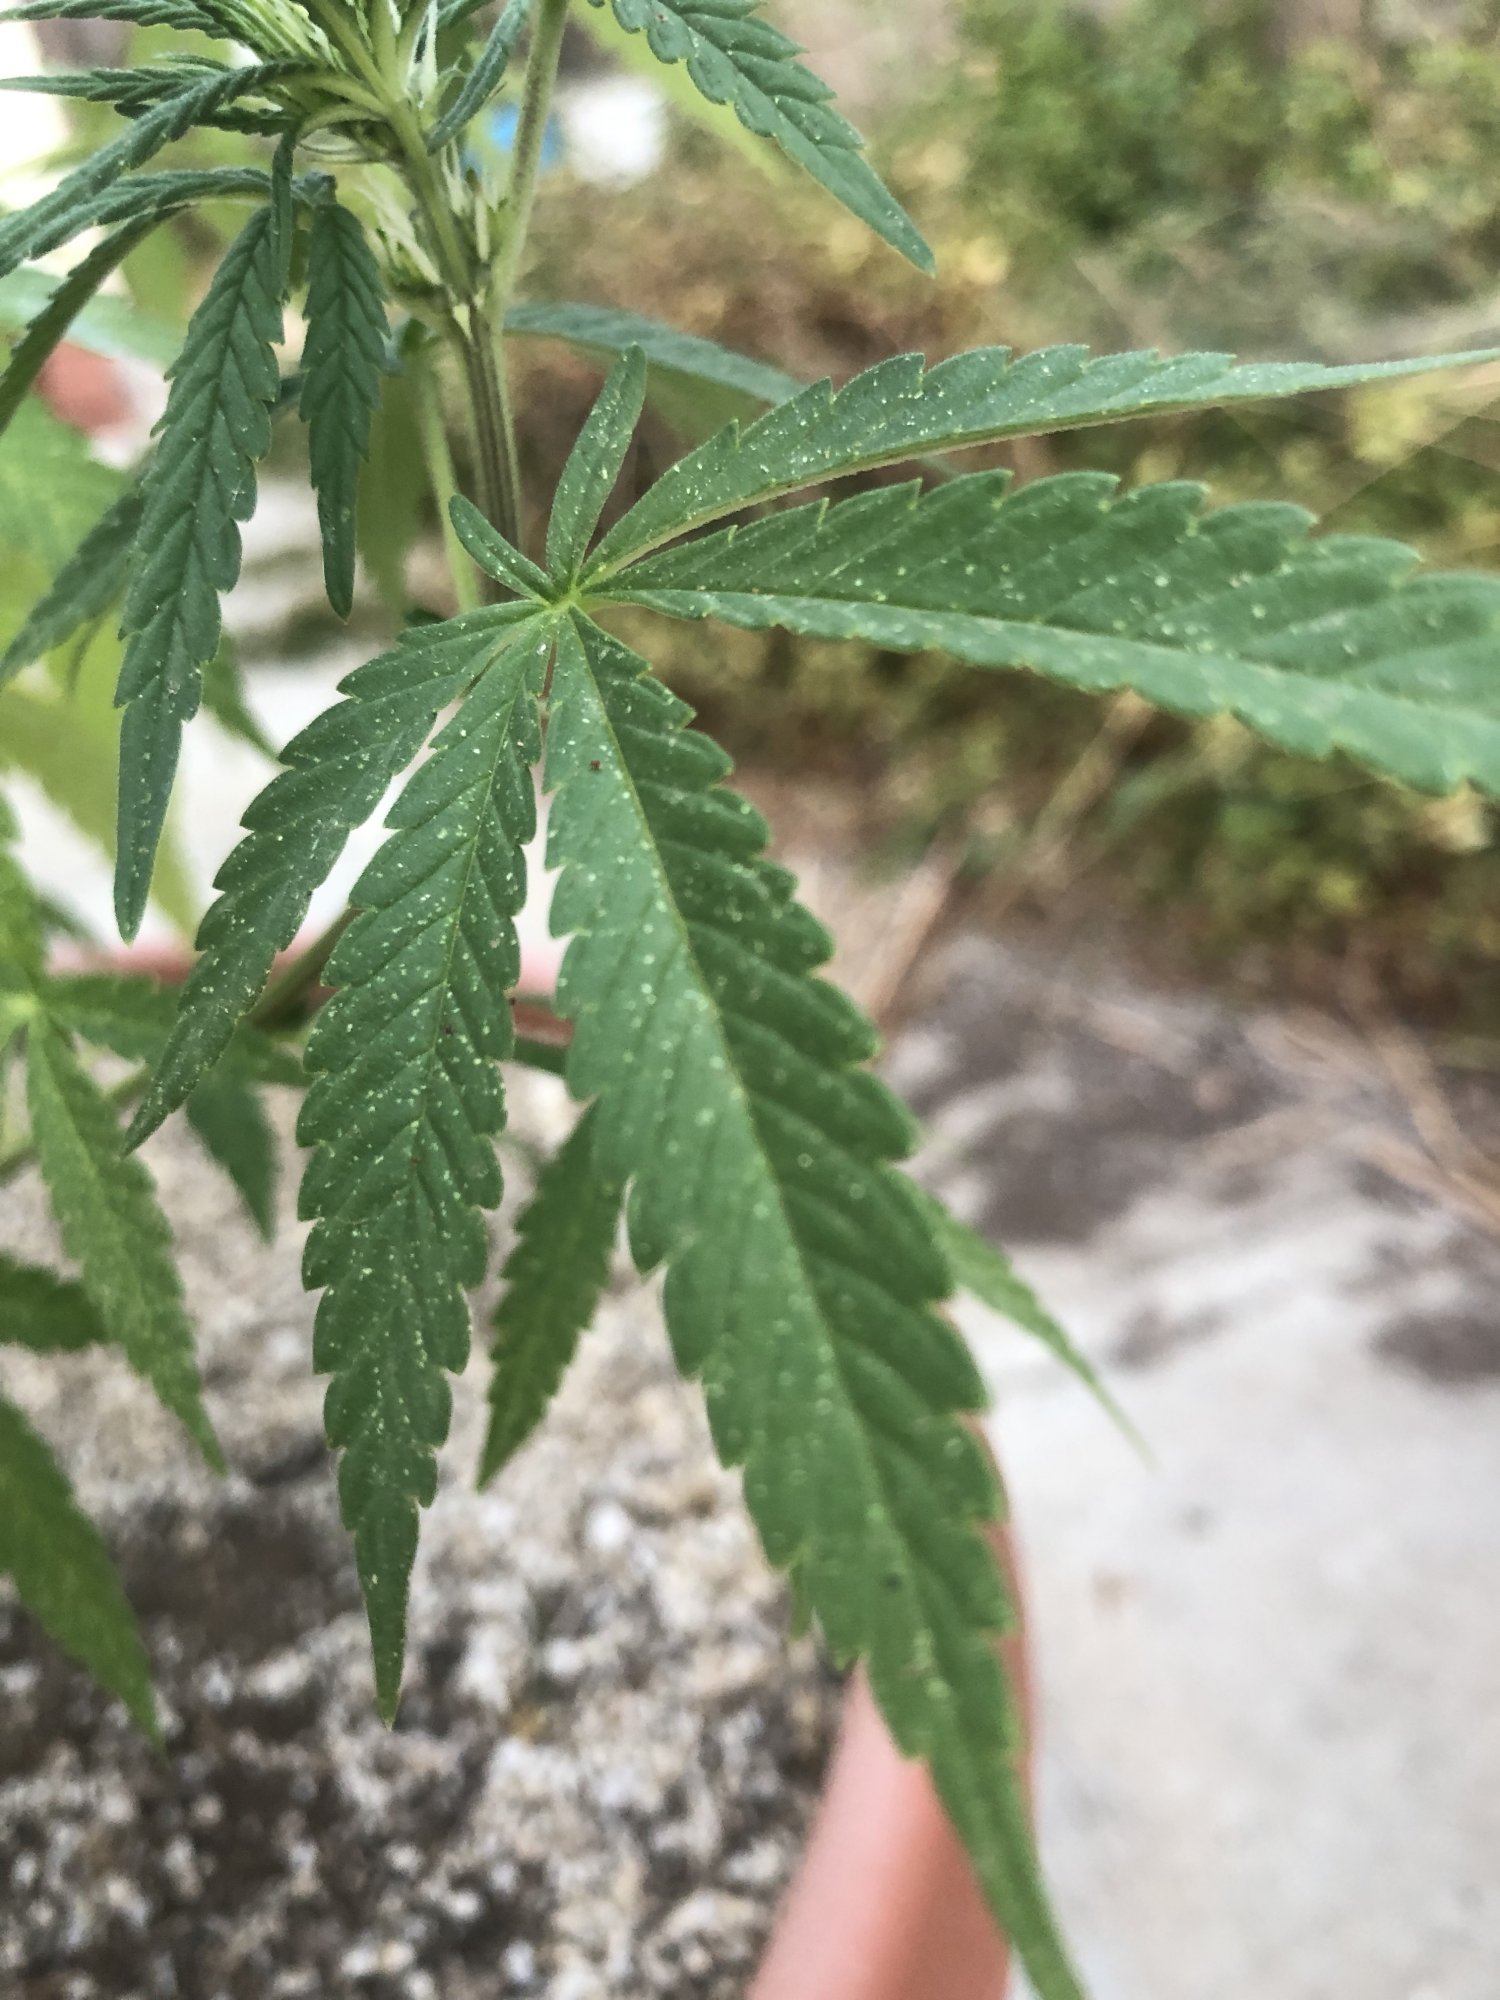 White spots pests or nutrient deficiency